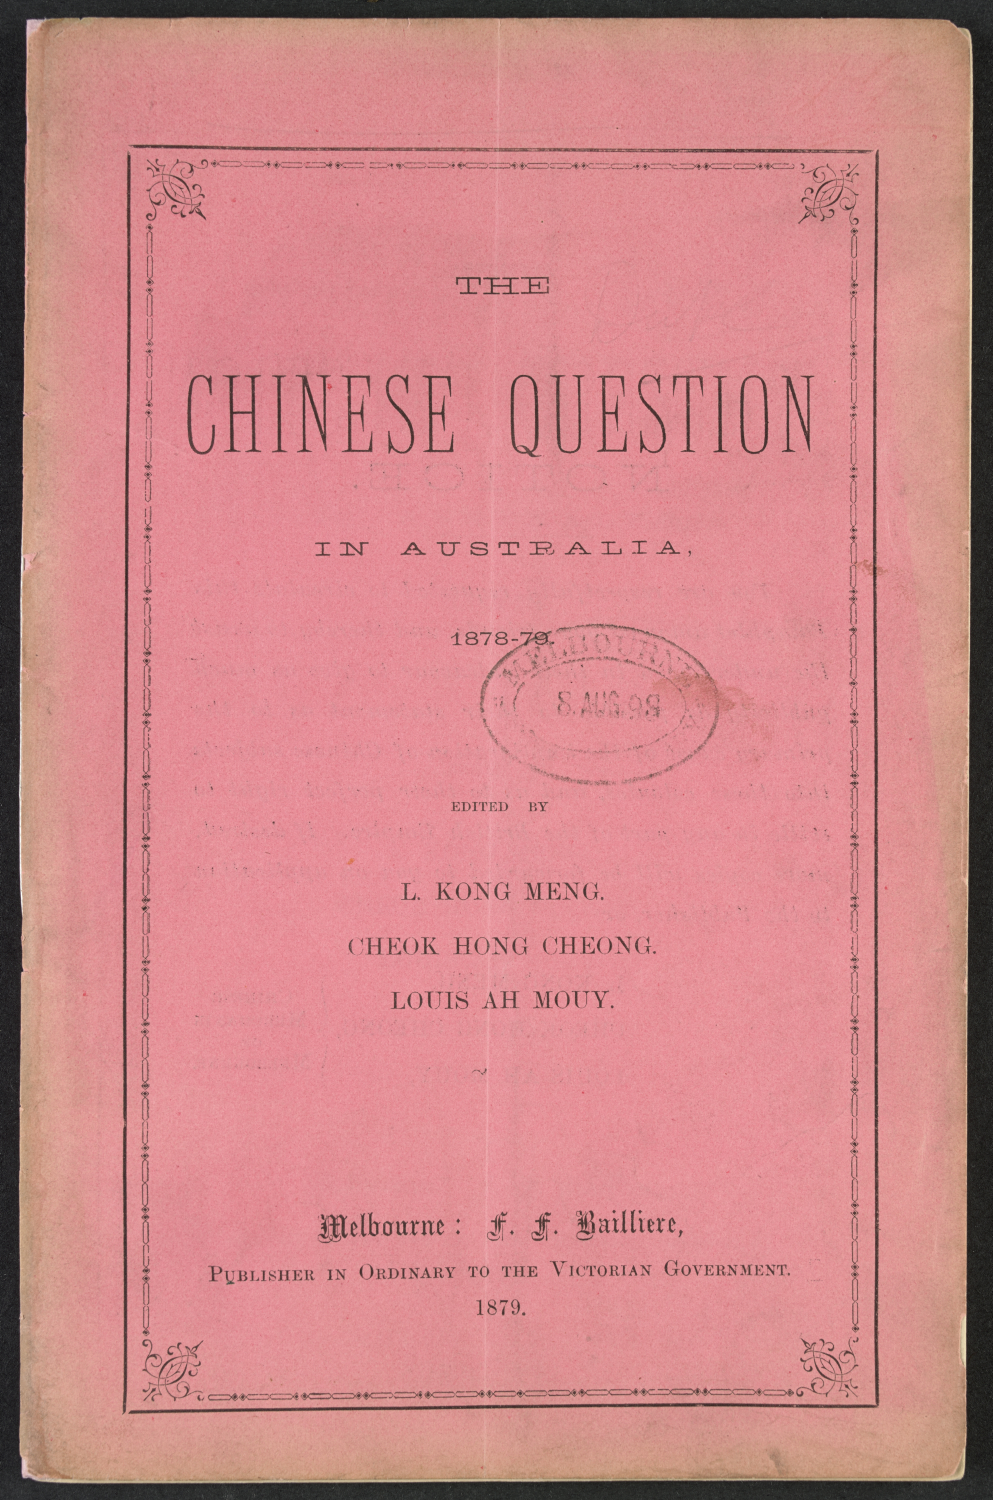 Front cover of a book called 'The Chinese question in Australia 1878-79'. Other text reads, 'edited by L Kong Meng, Cheok Hong Cheong, Louis Ah Mouy'